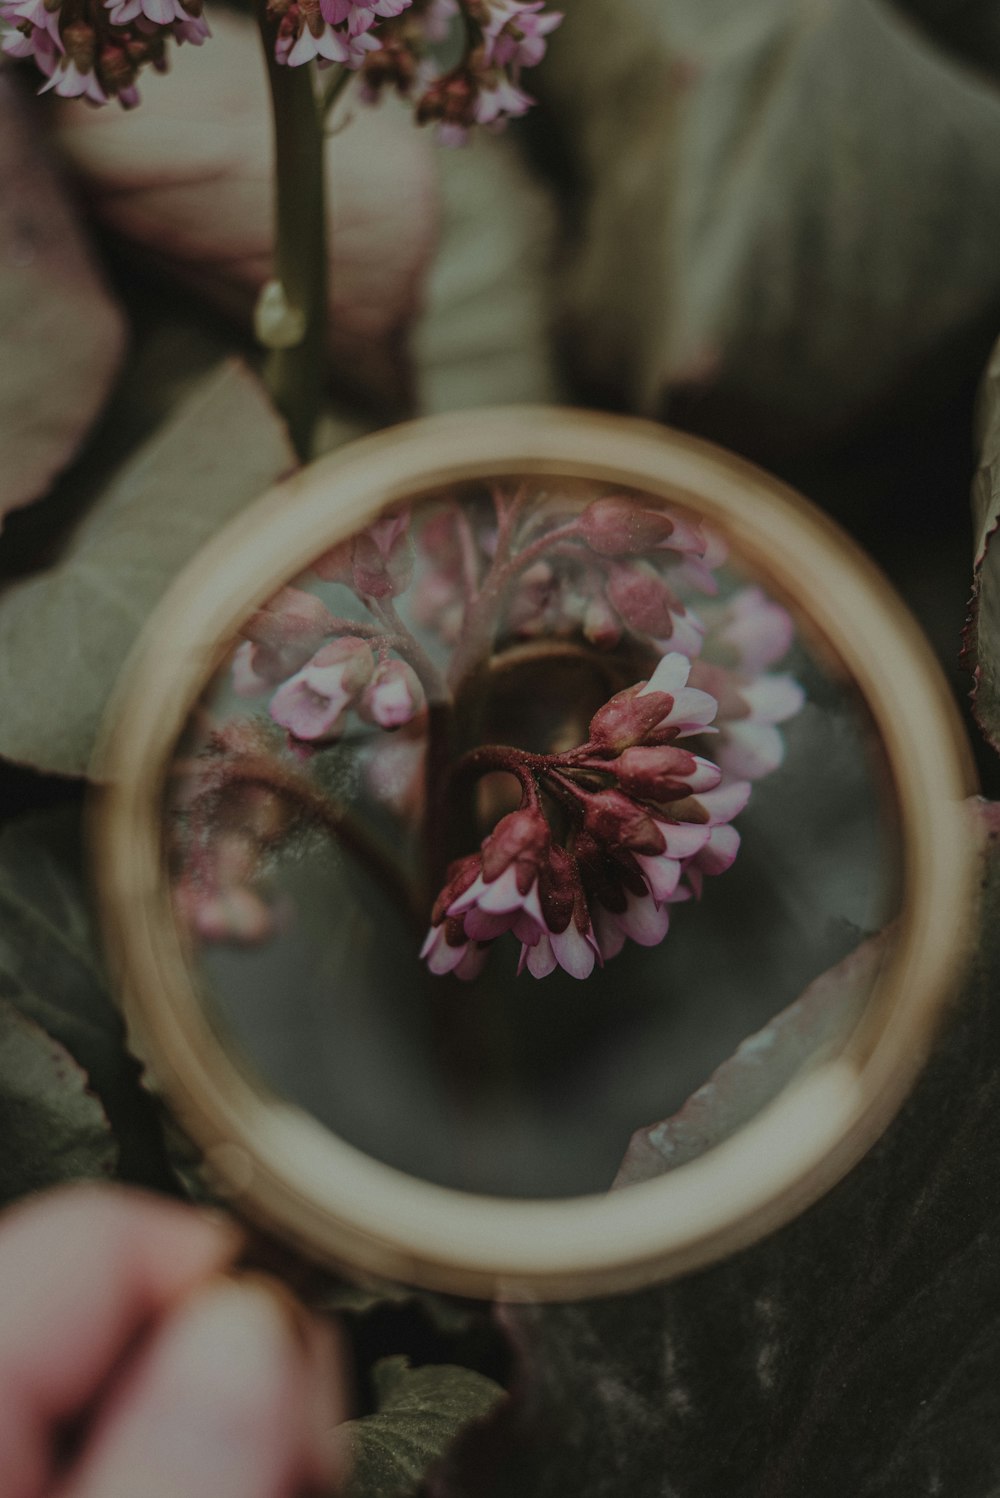 a person holding a magnifying glass with a flower in it